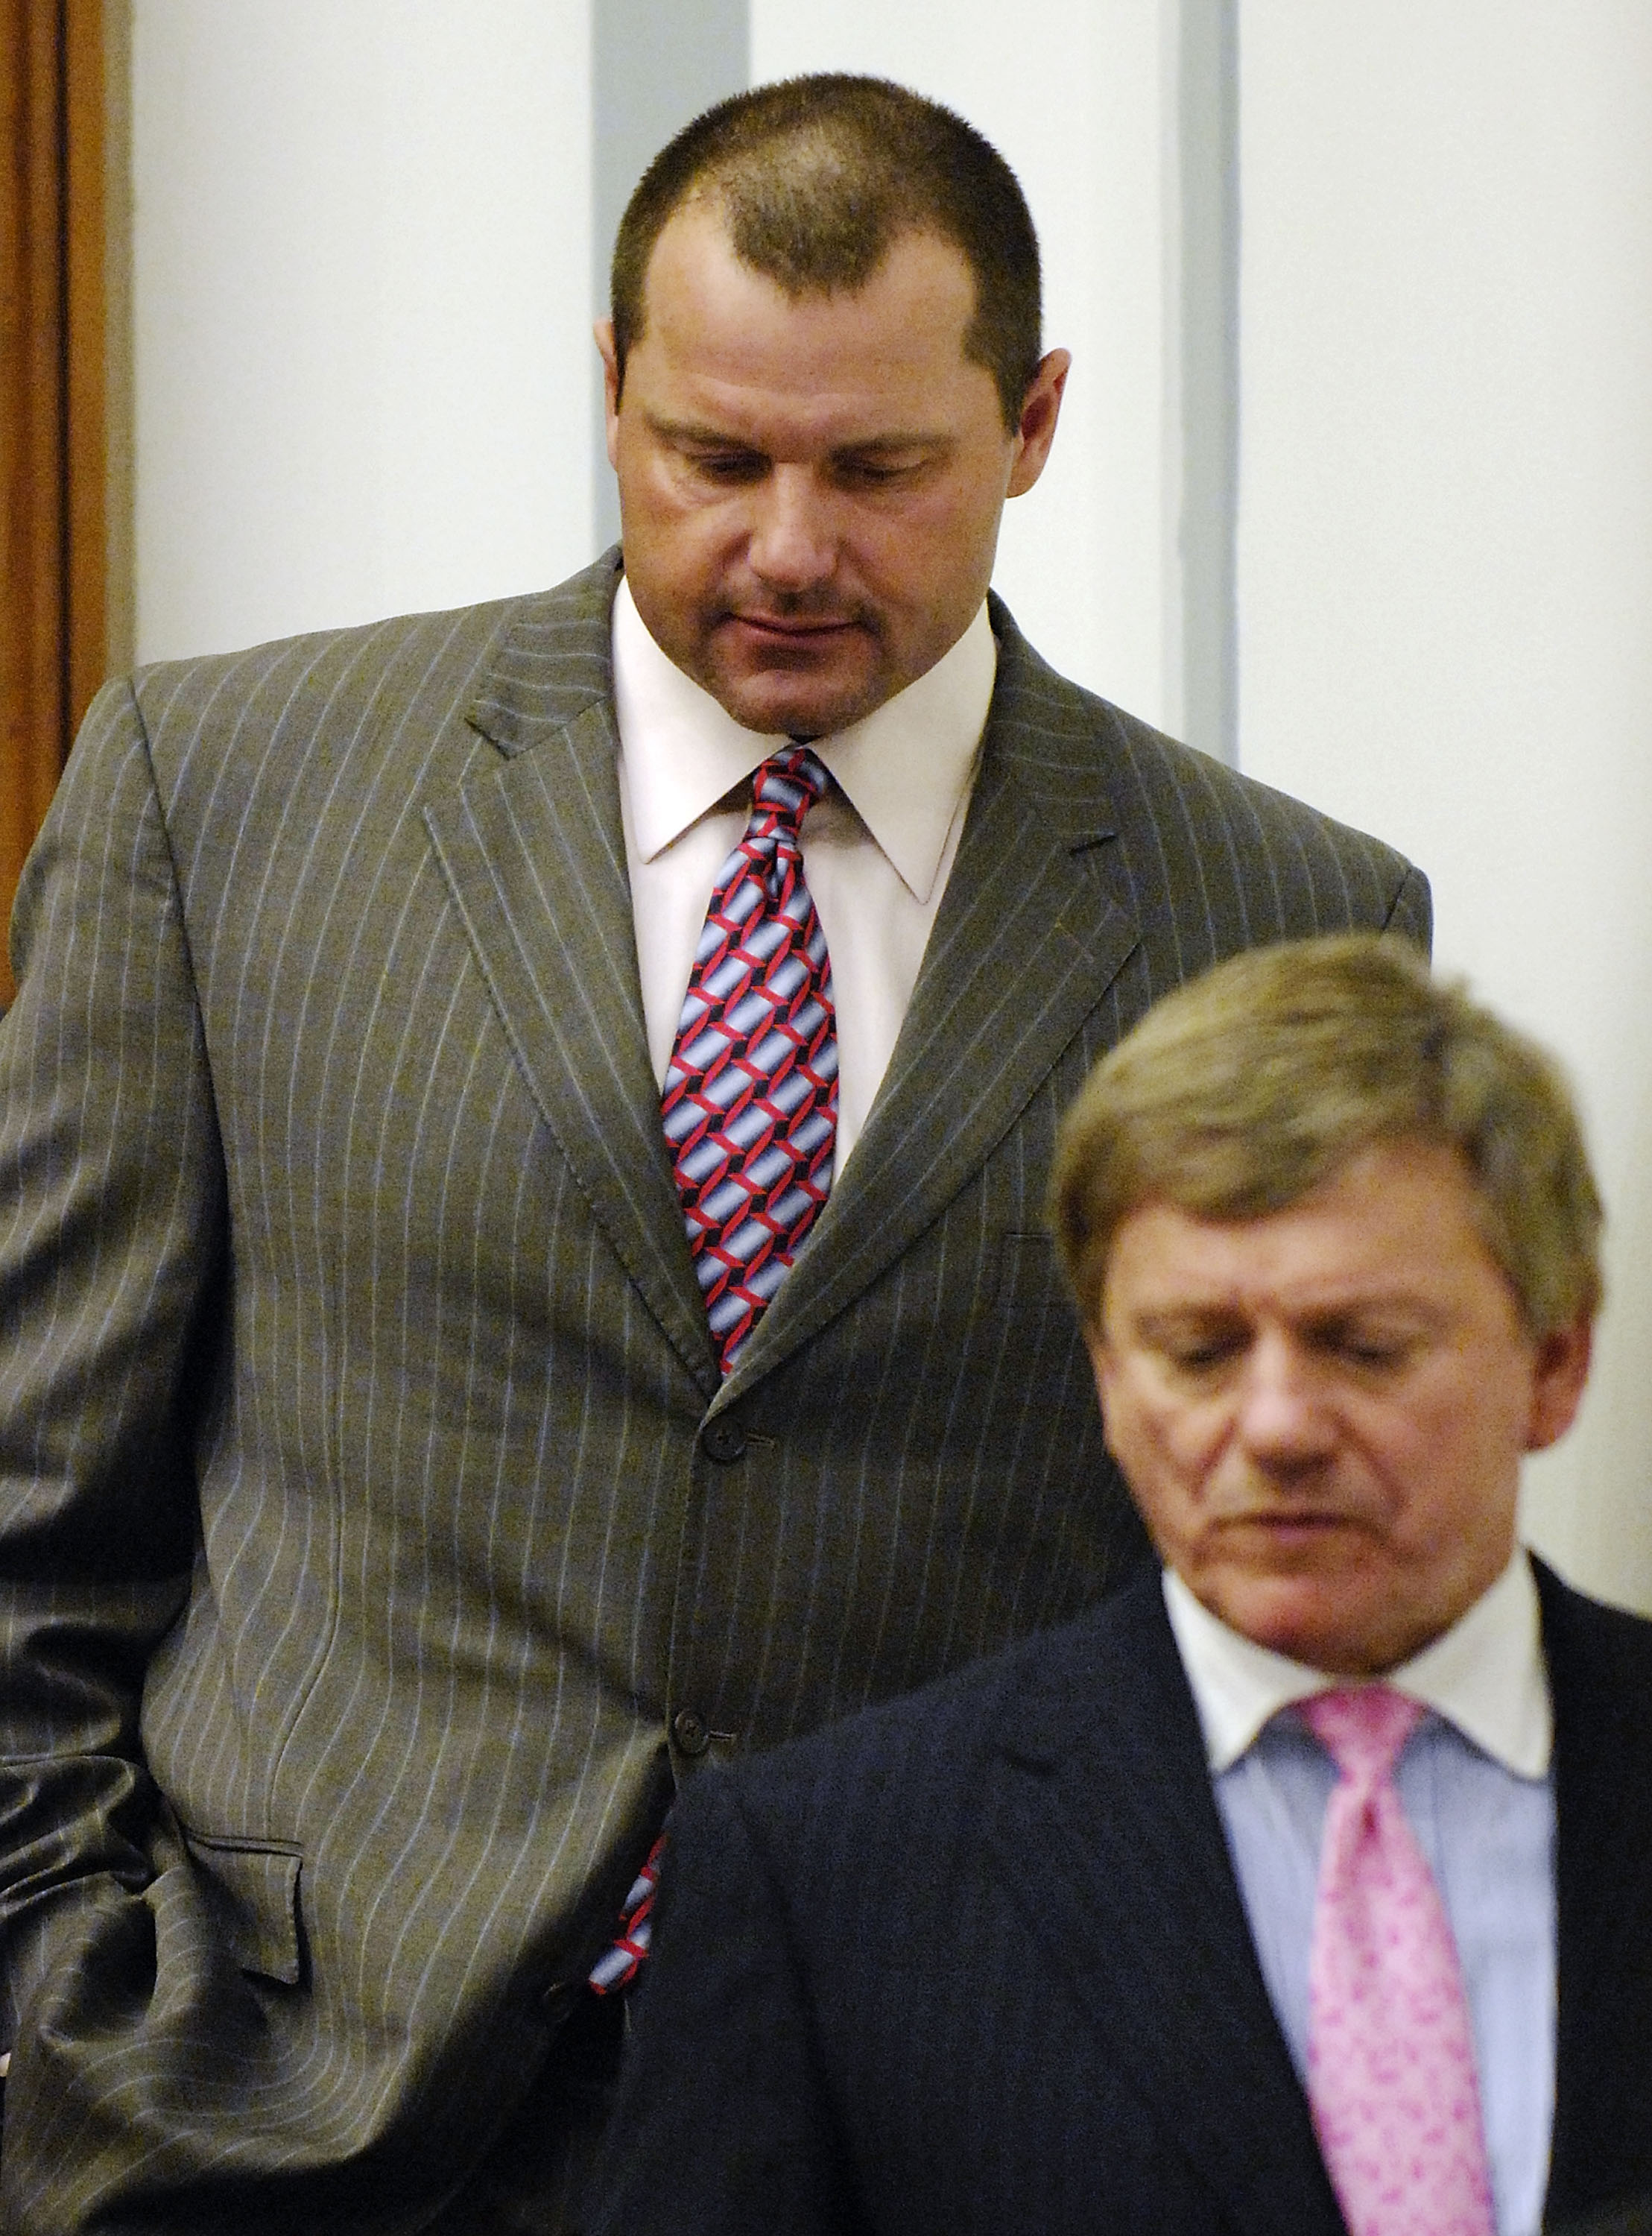 WASHINGTON - FEBRUARY 05:  Former New York Yankees pitcher Roger Clemens (R) departs with his attorneys Rusty Hardin (C) and Lanny Breuer (L),  after being deposed by the House Oversight and Government Reform Committee about steroid use in Major League Ba